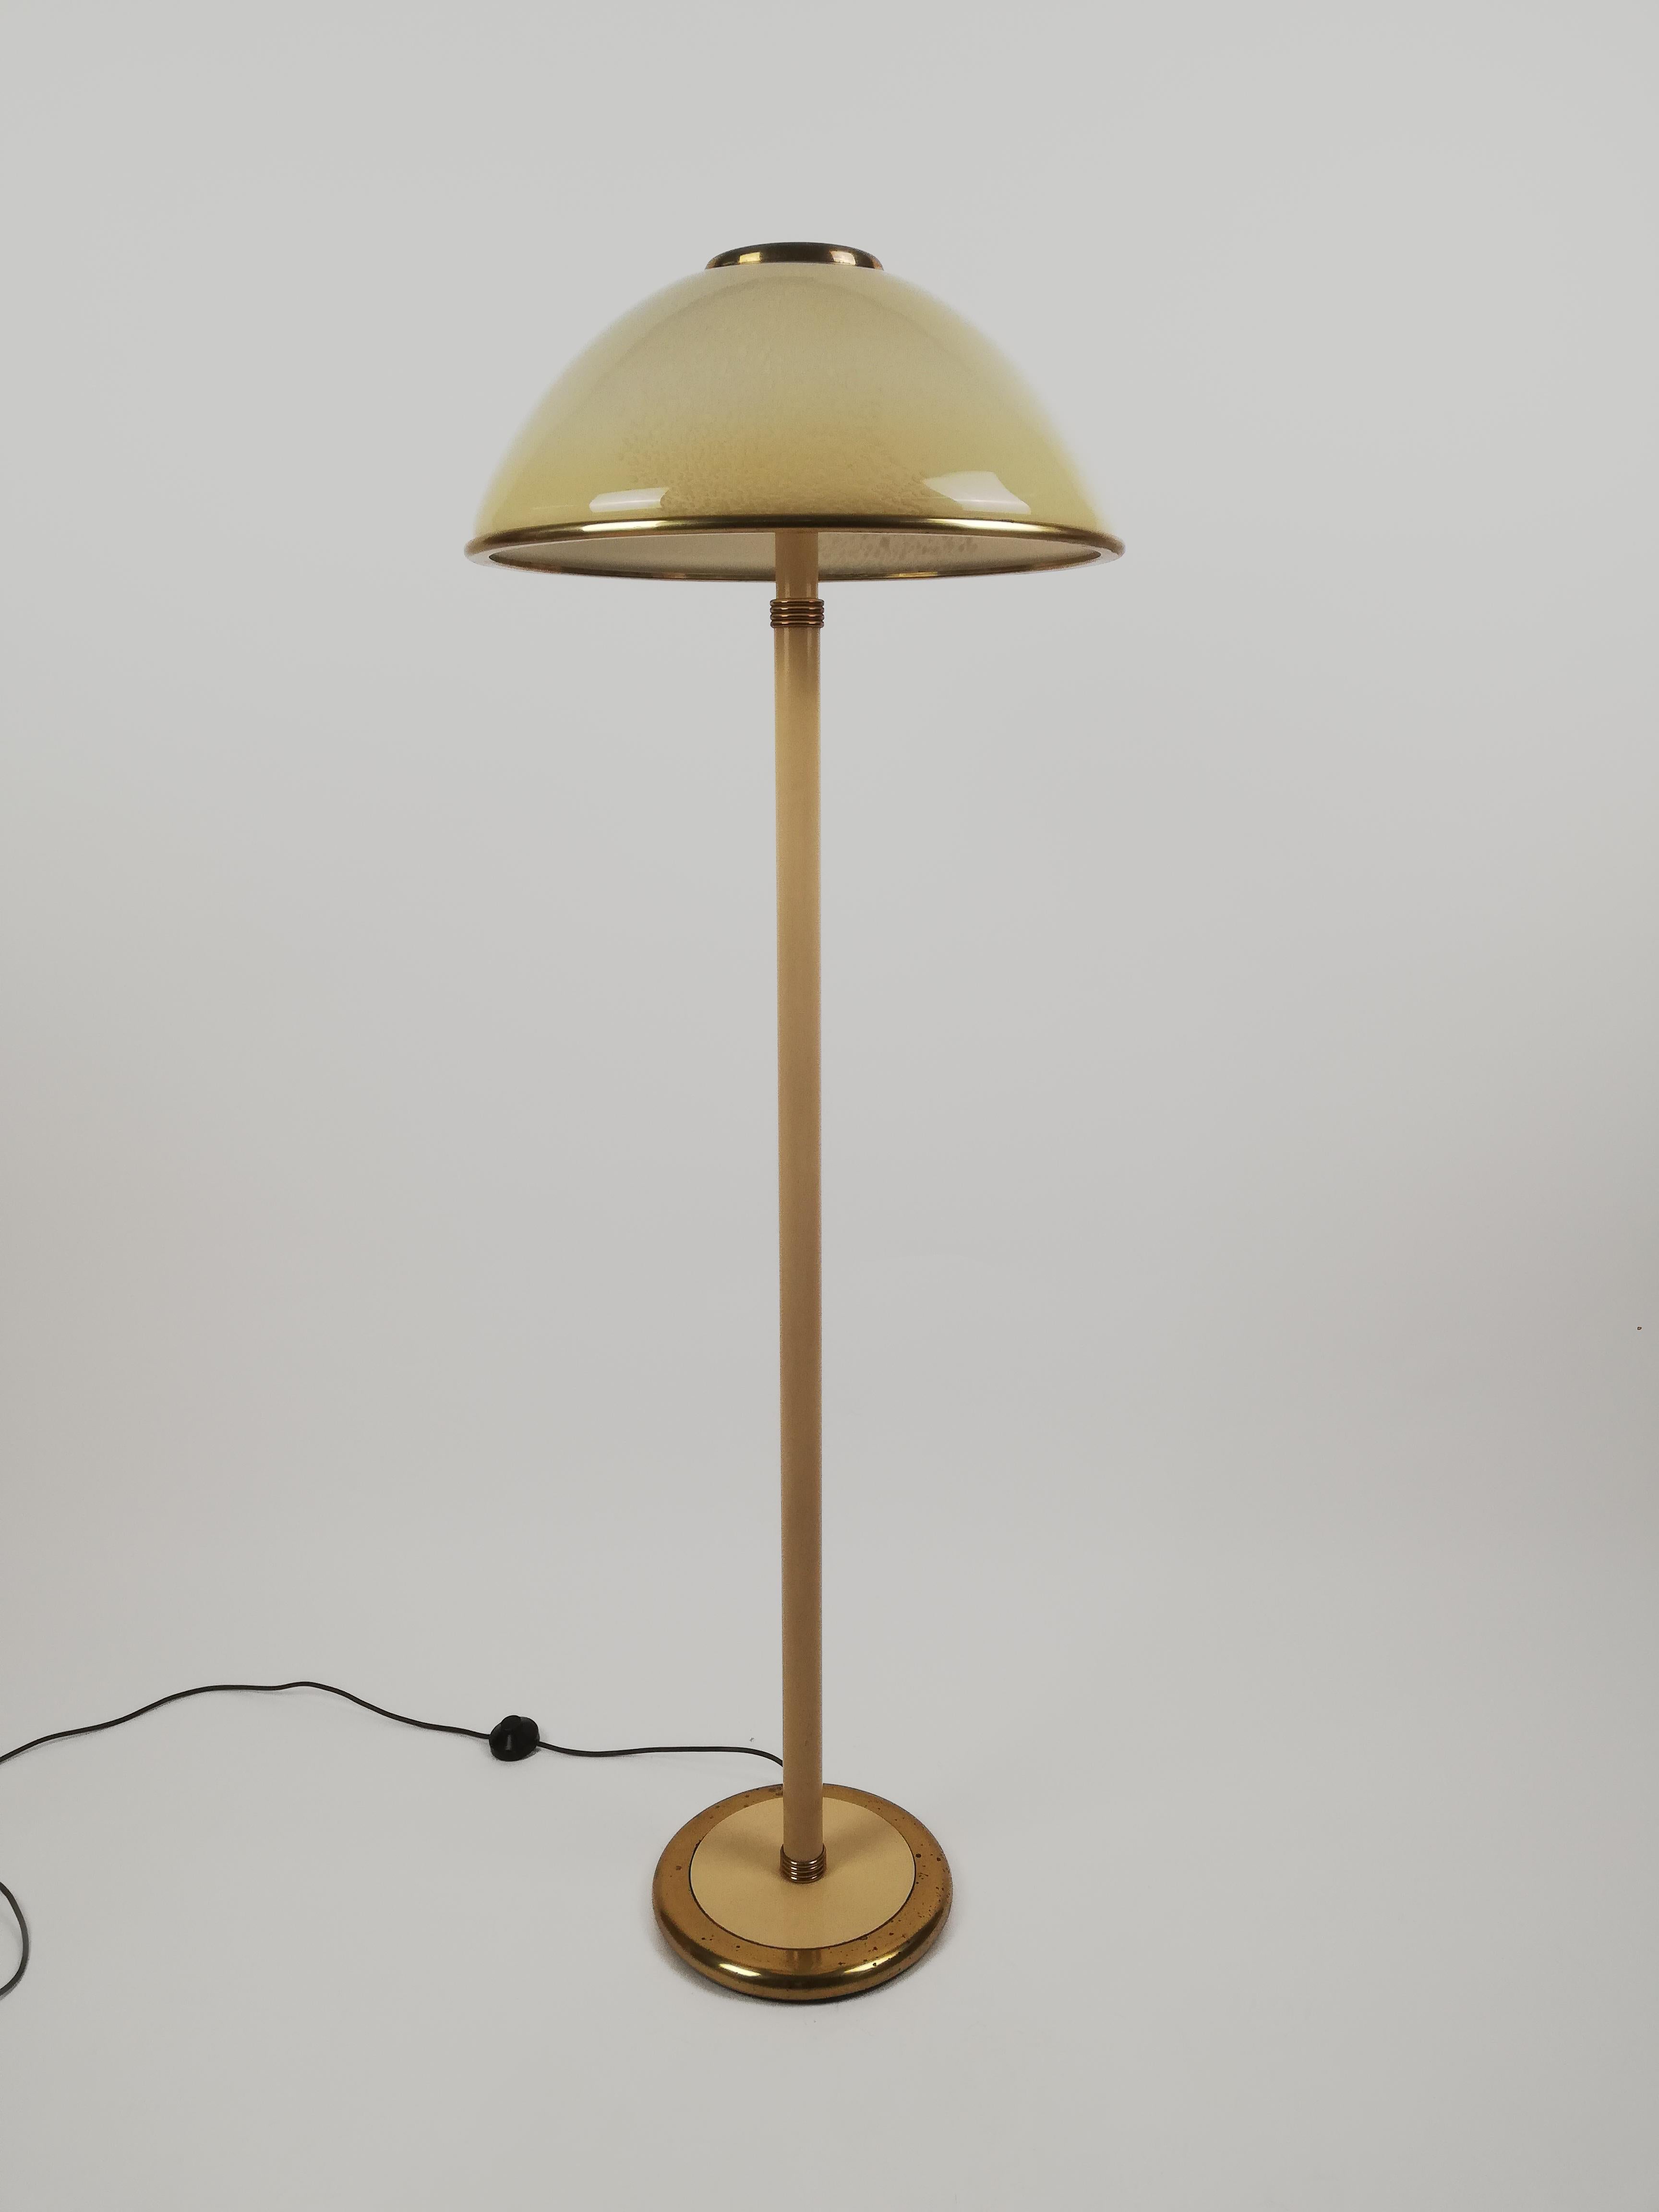 1970s Italian Floor Lamp in Brass and Artistic Murano Glass by F. Fabbian For Sale 11